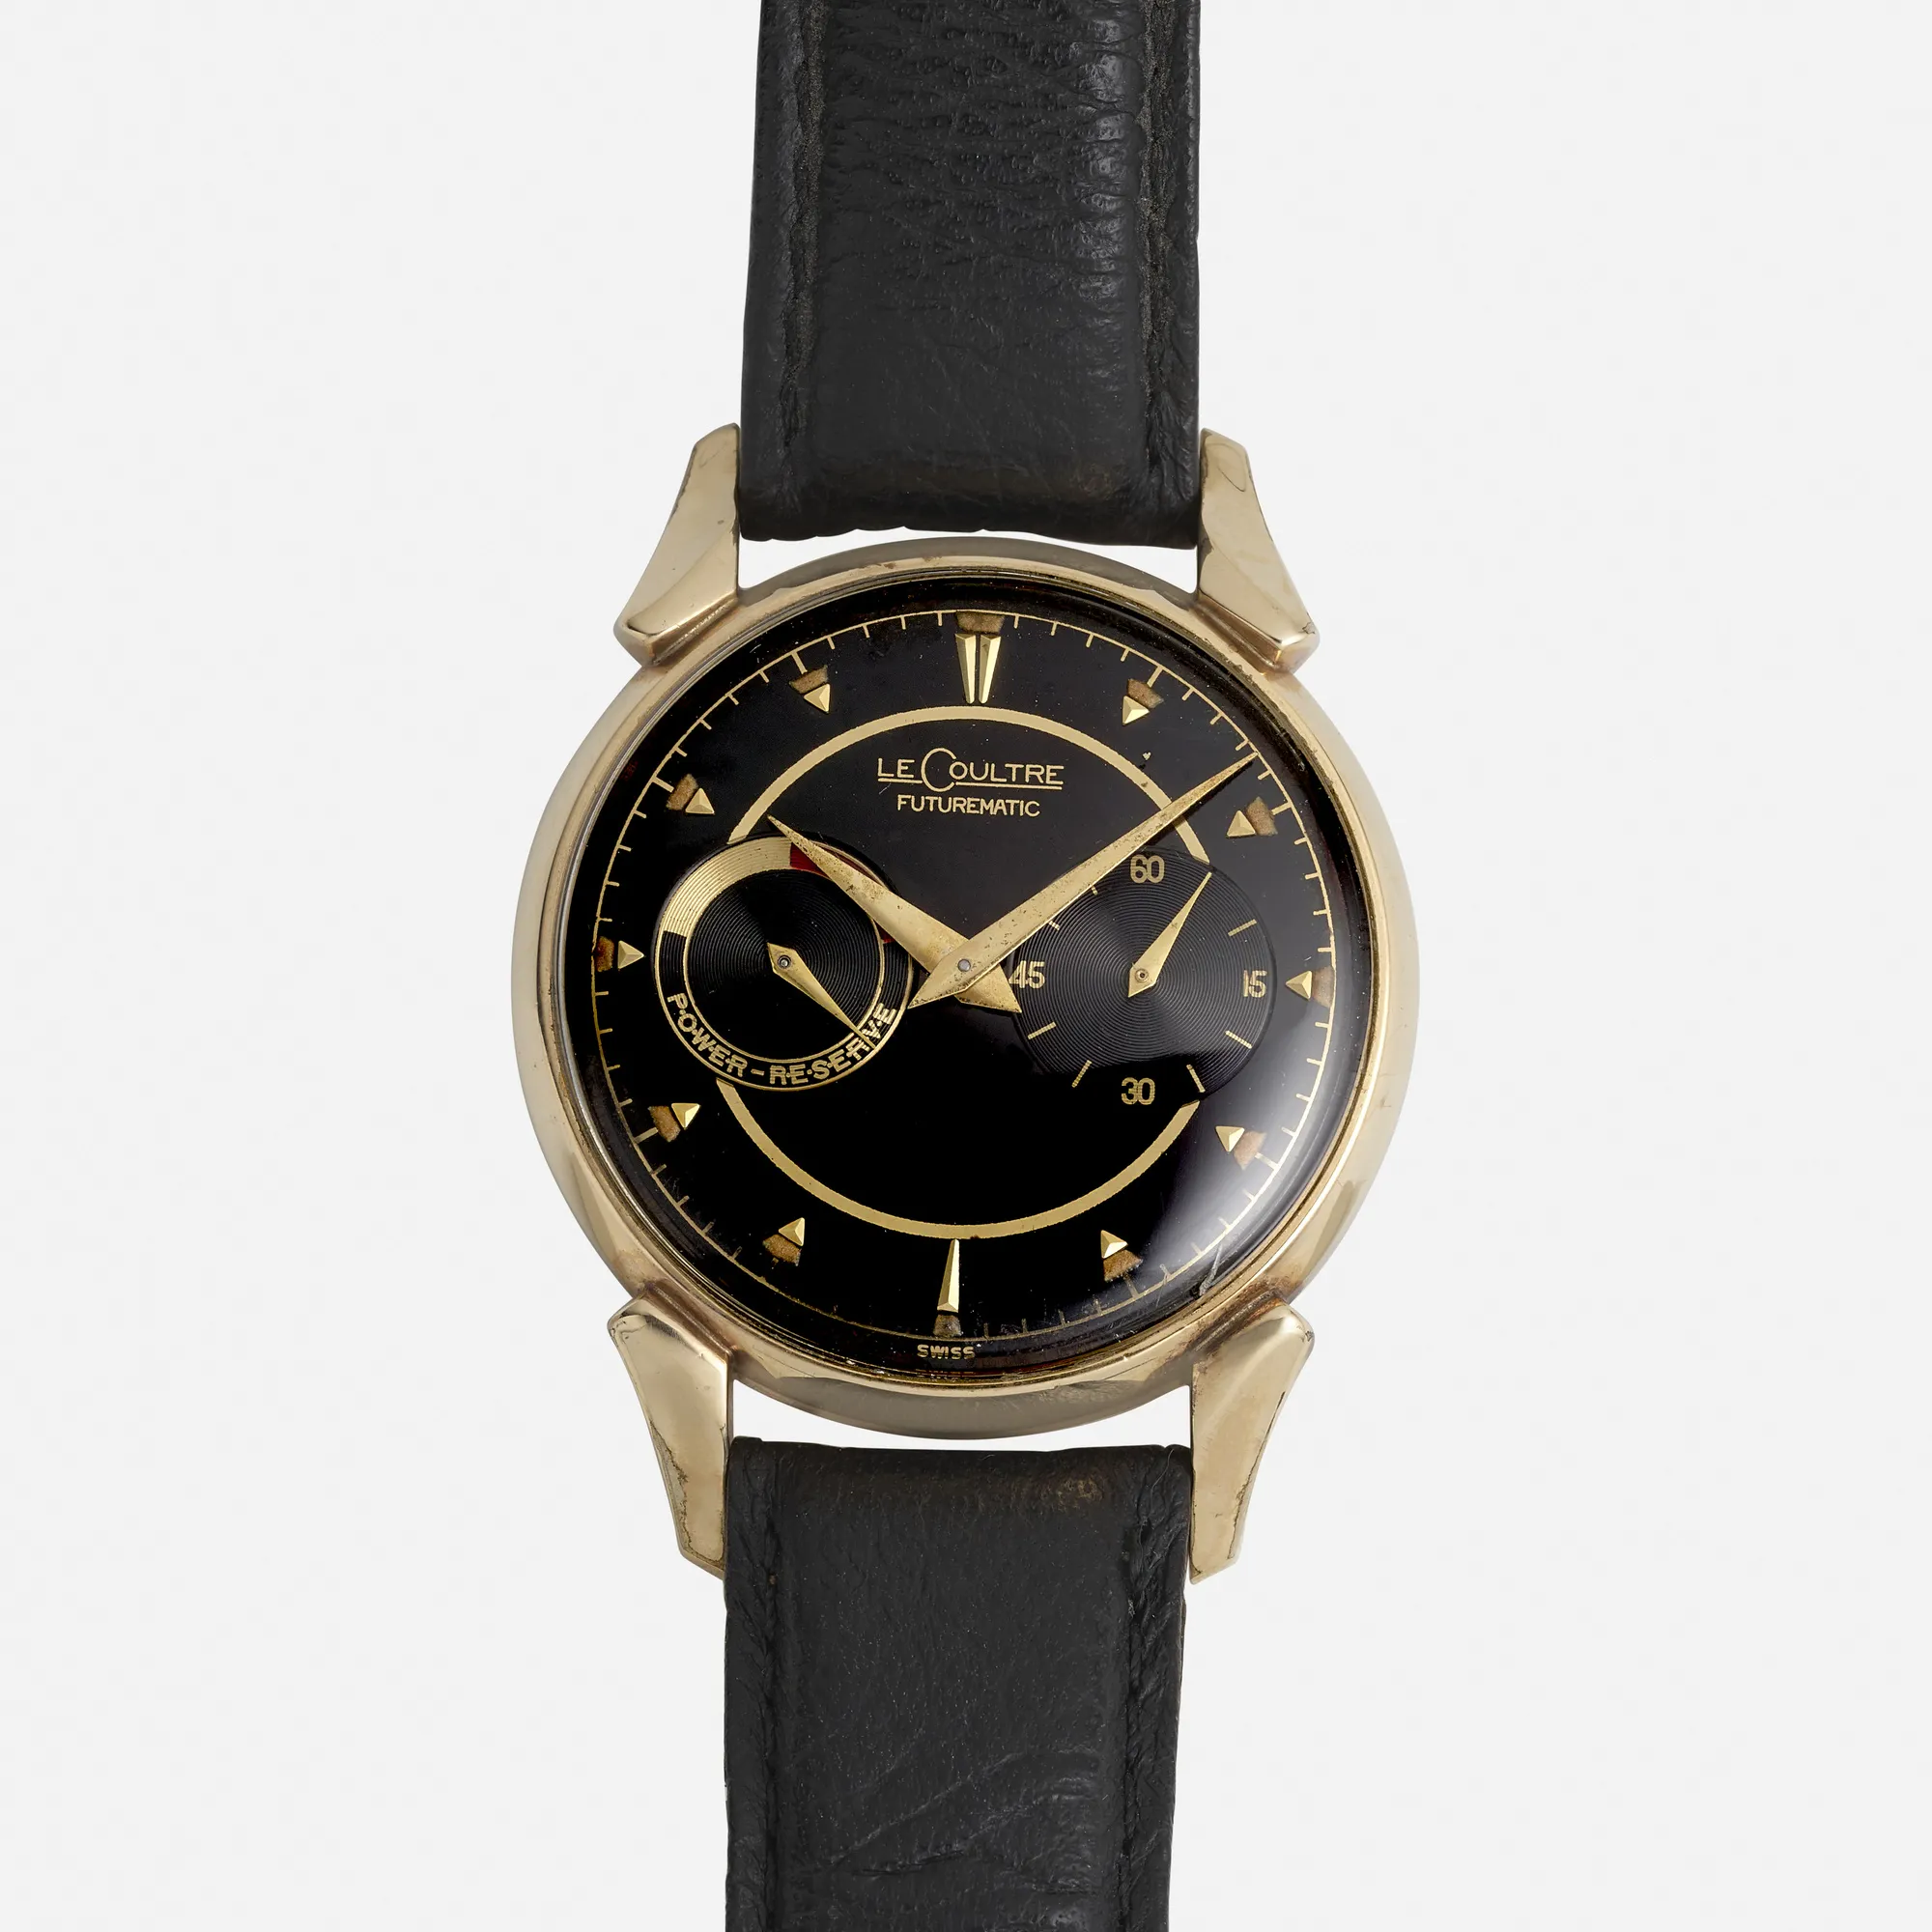 Jaeger-LeCoultre Futurematic 44mm Yellow gold and stainless steel Black